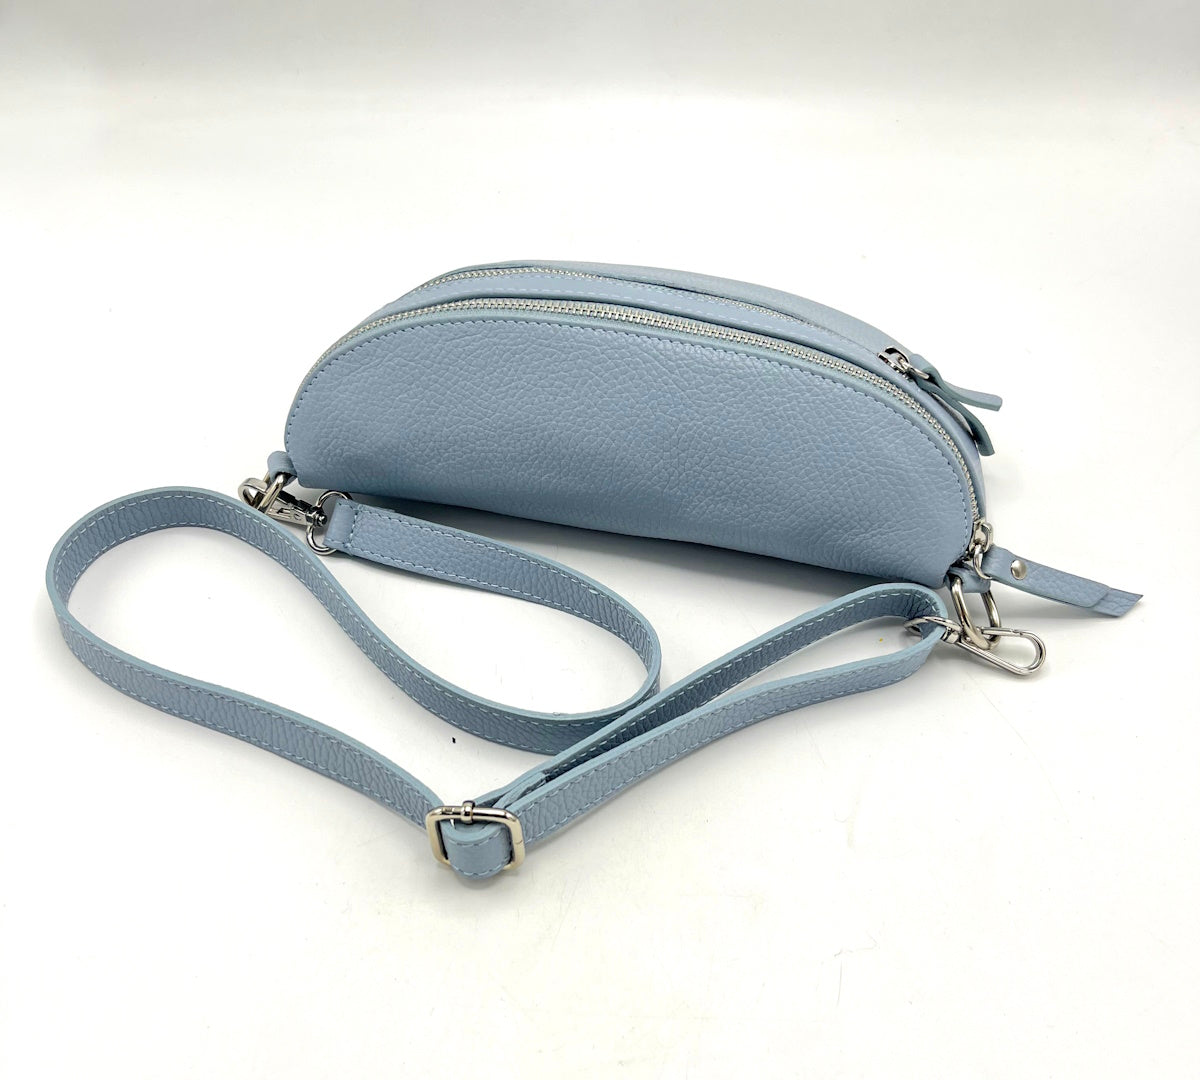 Genuine leather crossbody bag, Made in Italy, art. 112467